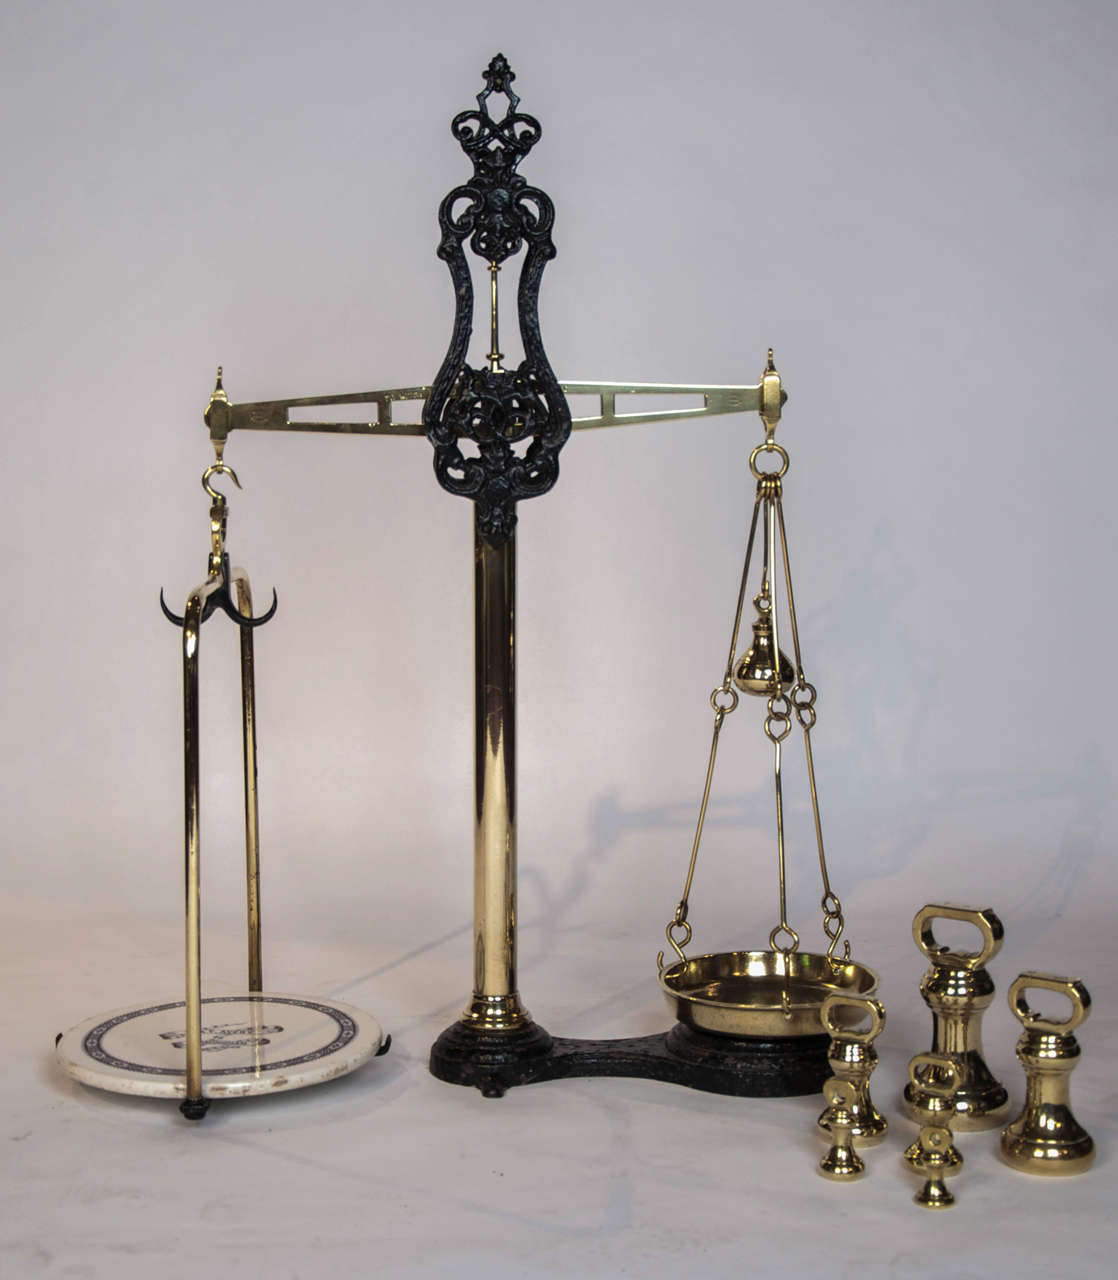 A fine and decorative set of Victorian brass and painted iron weighing scales by W&T Avery of Birmingham. Stamped Patent Agate Balance.